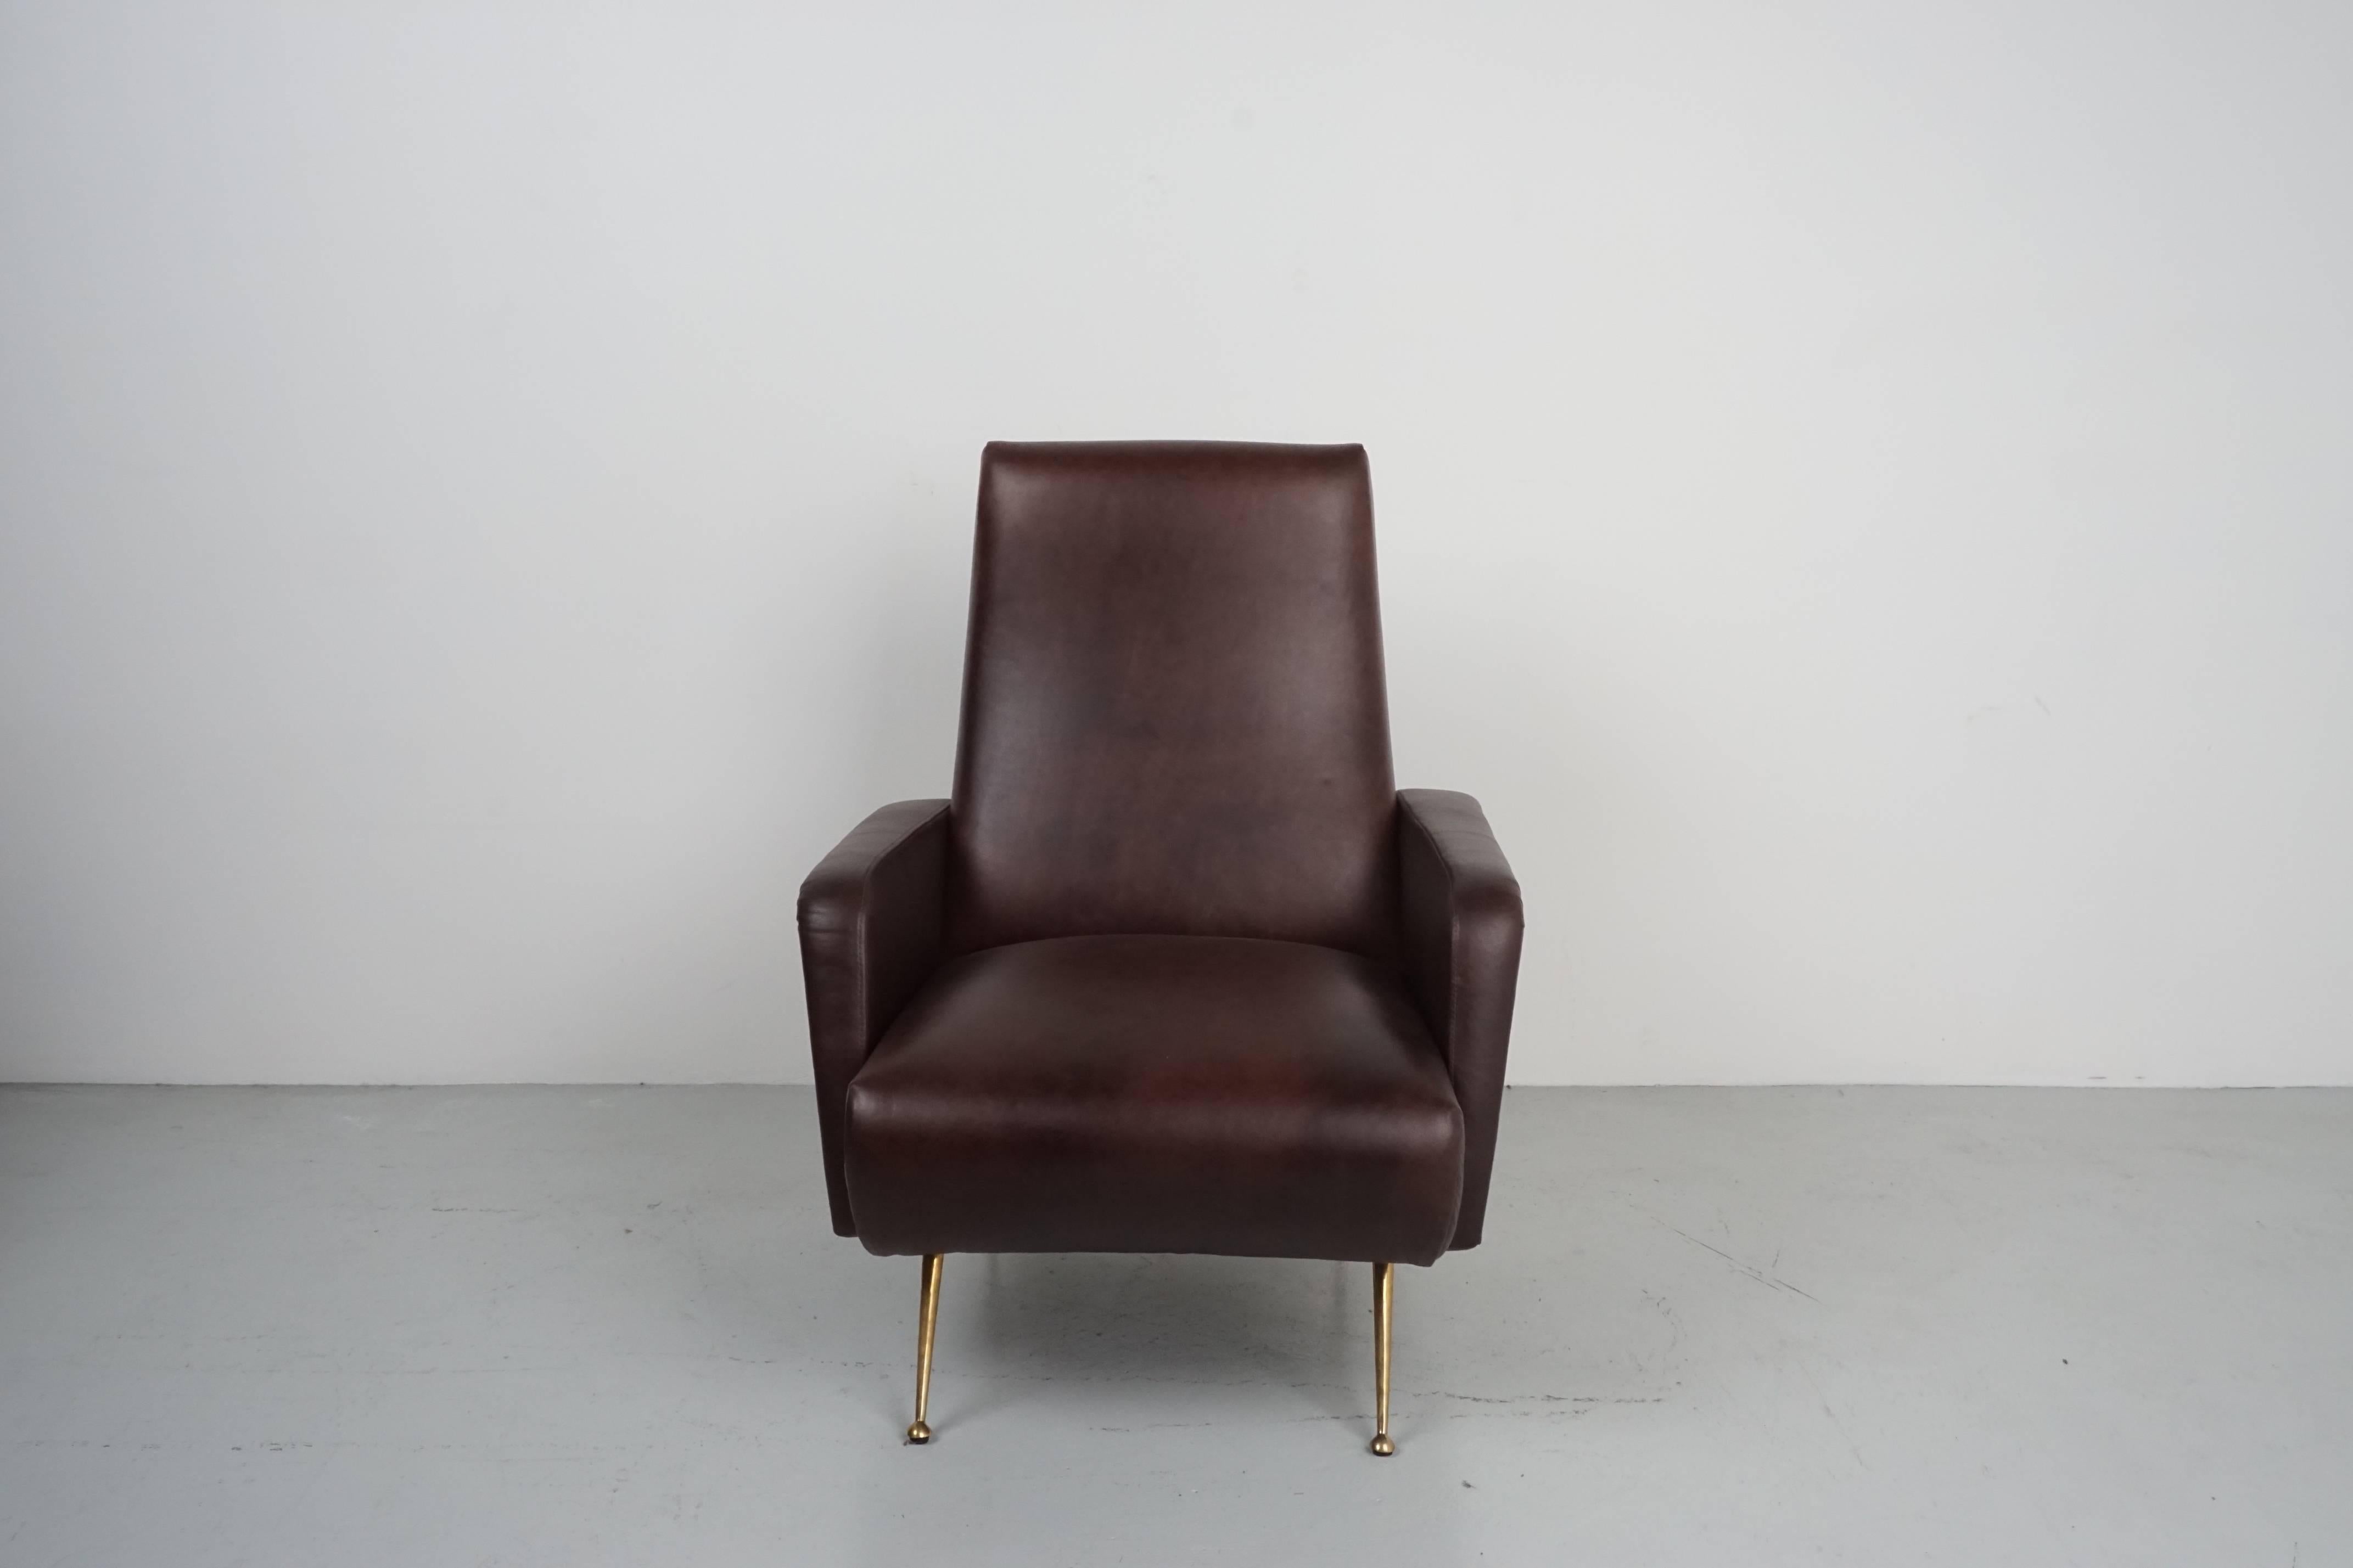 Fantastic pair of sculptural Italian chairs in the style of Marco Zanuso. Beautifully reupholstered dark chocolate brown leather and newly plated polished brass legs. Gorgeous from every angle!